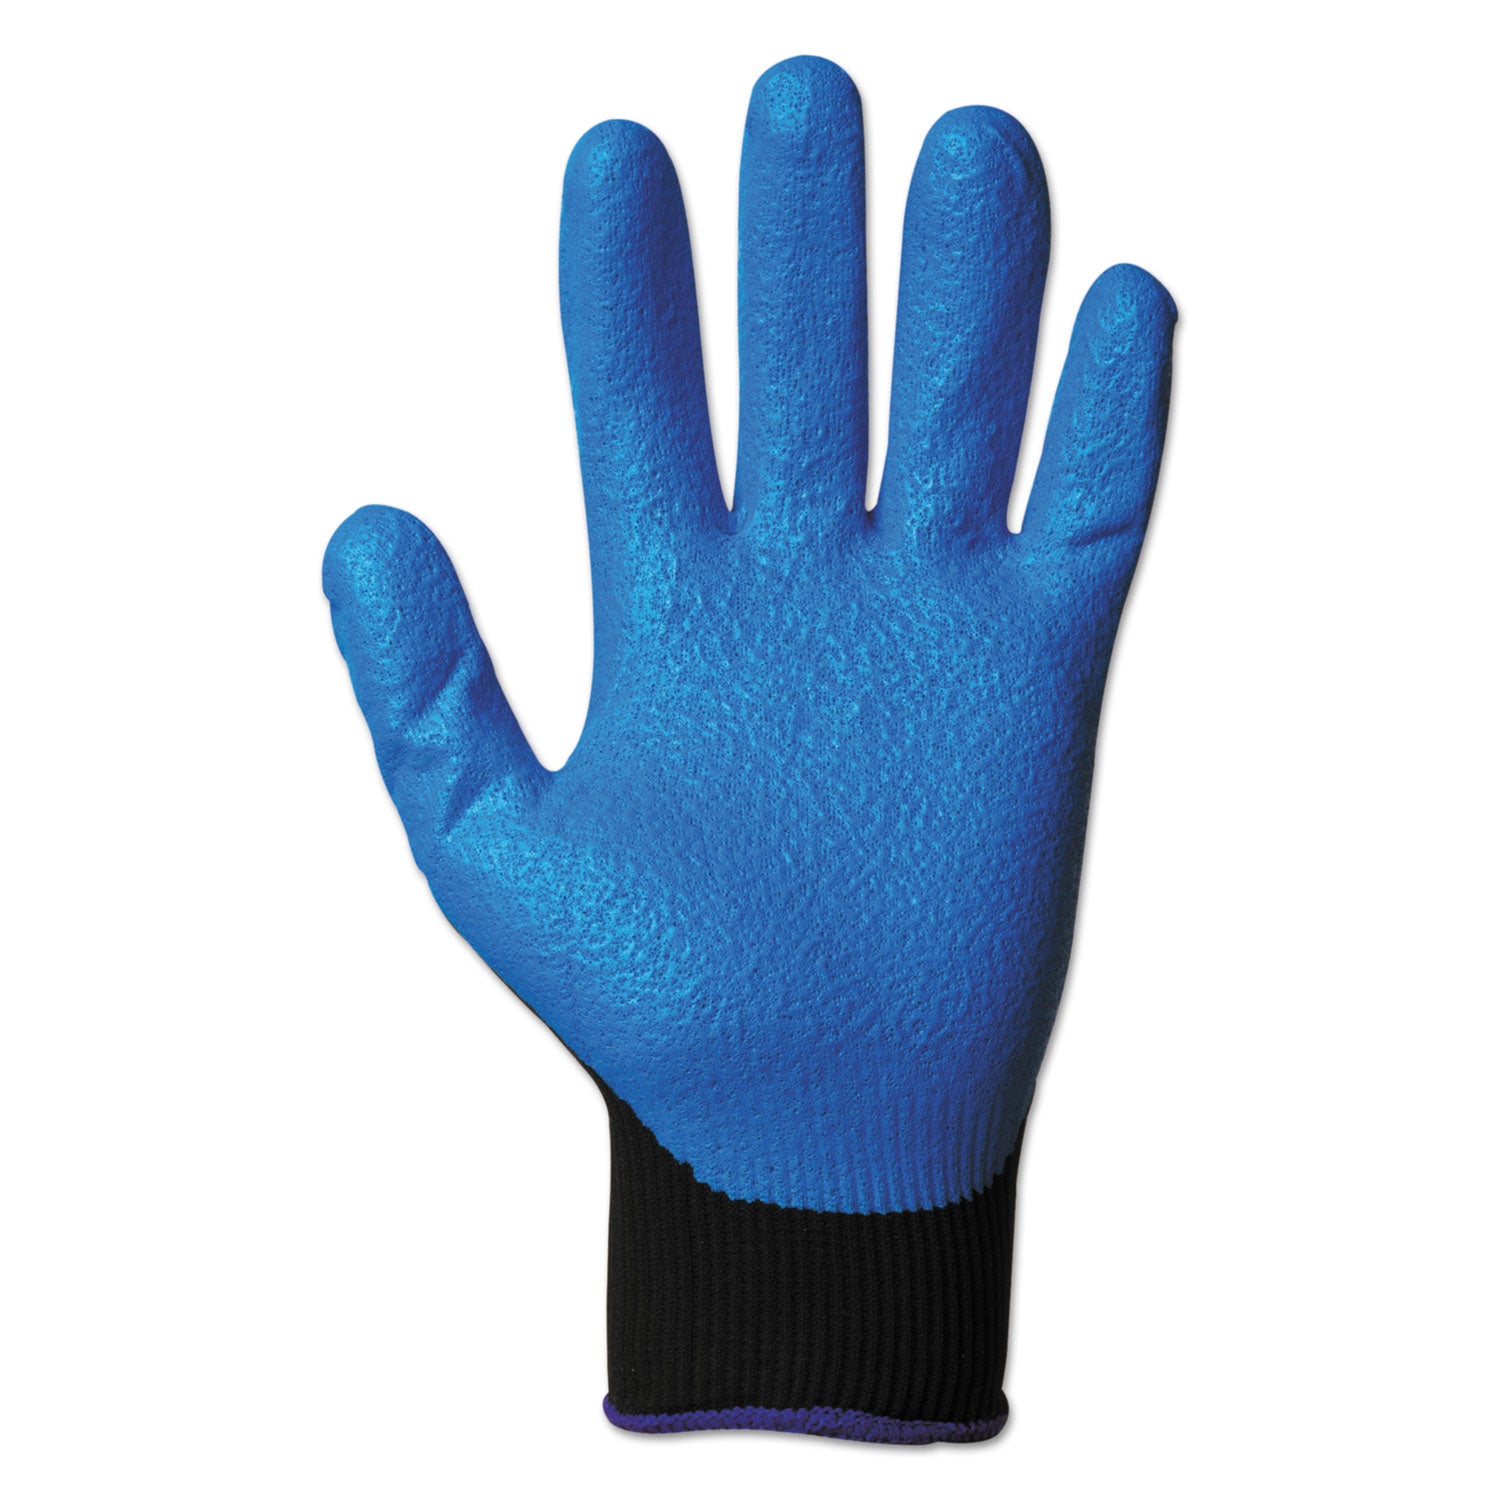 g40-foam-nitrile-coated-gloves-250-mm-length-x-large-size-10-blue-12-pairs_kcc40228 - 2